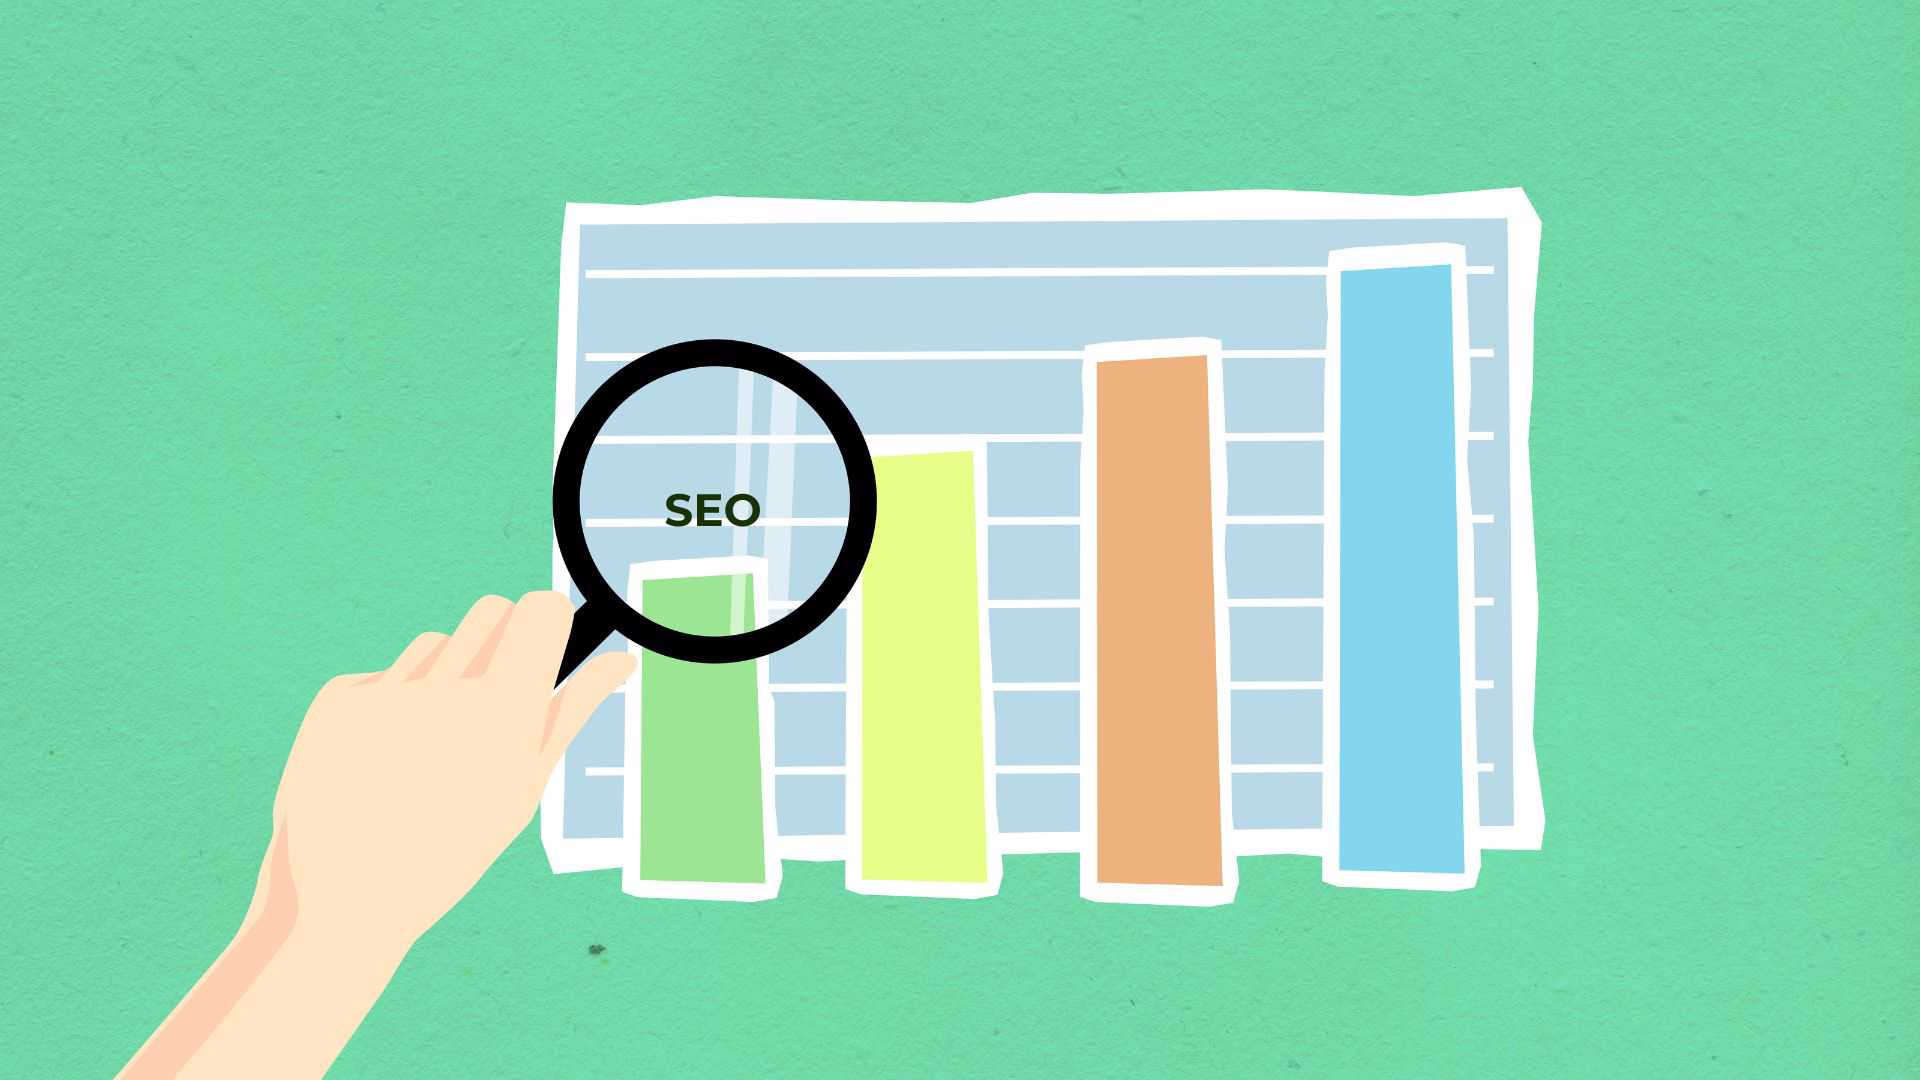 How to improve CTR in SEO Organically